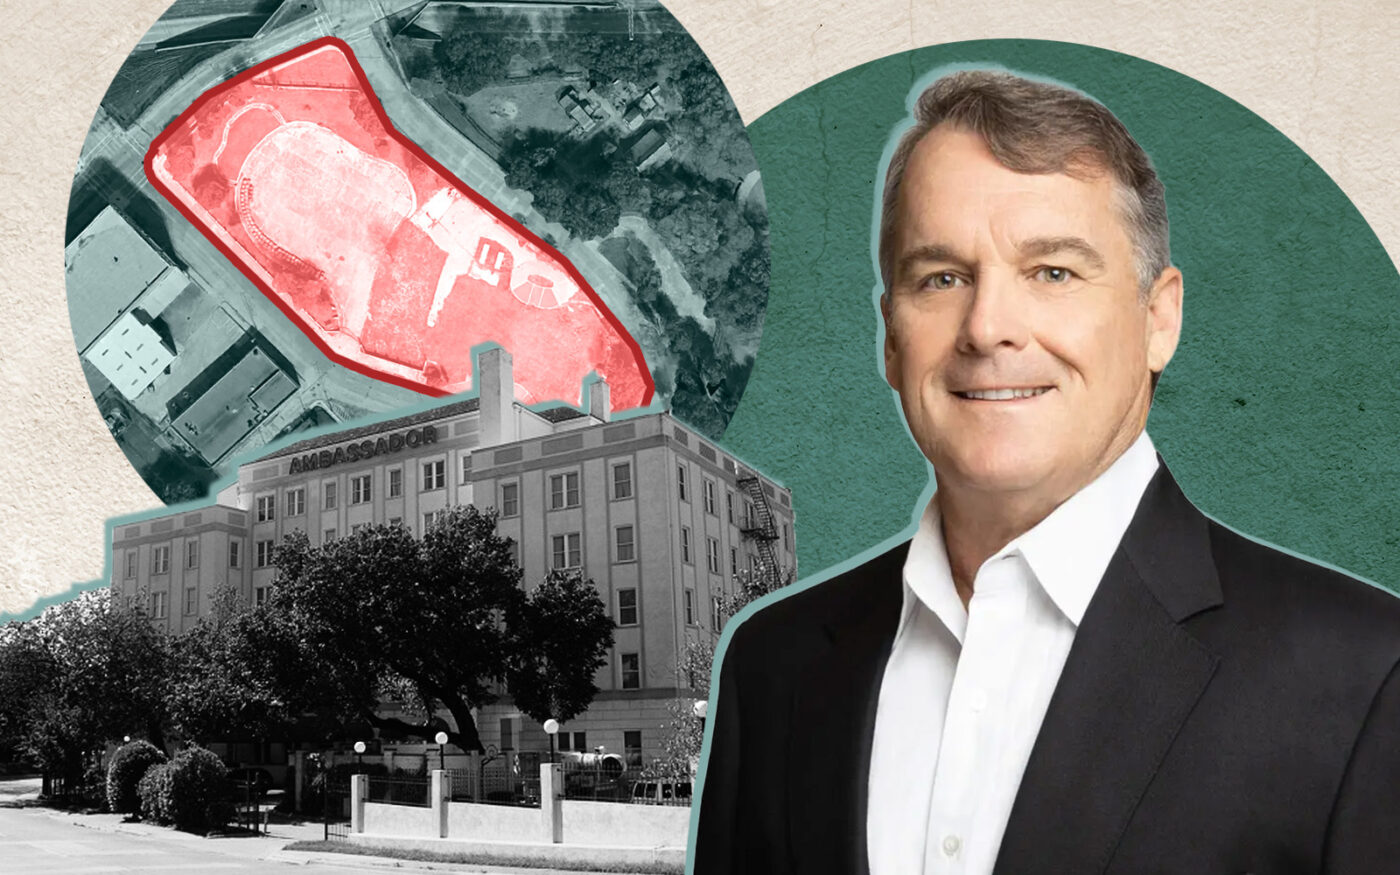 OHT Partners' Craig Hughes with The Ambassador Hotel and its new location at 1300 S Ervay Street in Dallas